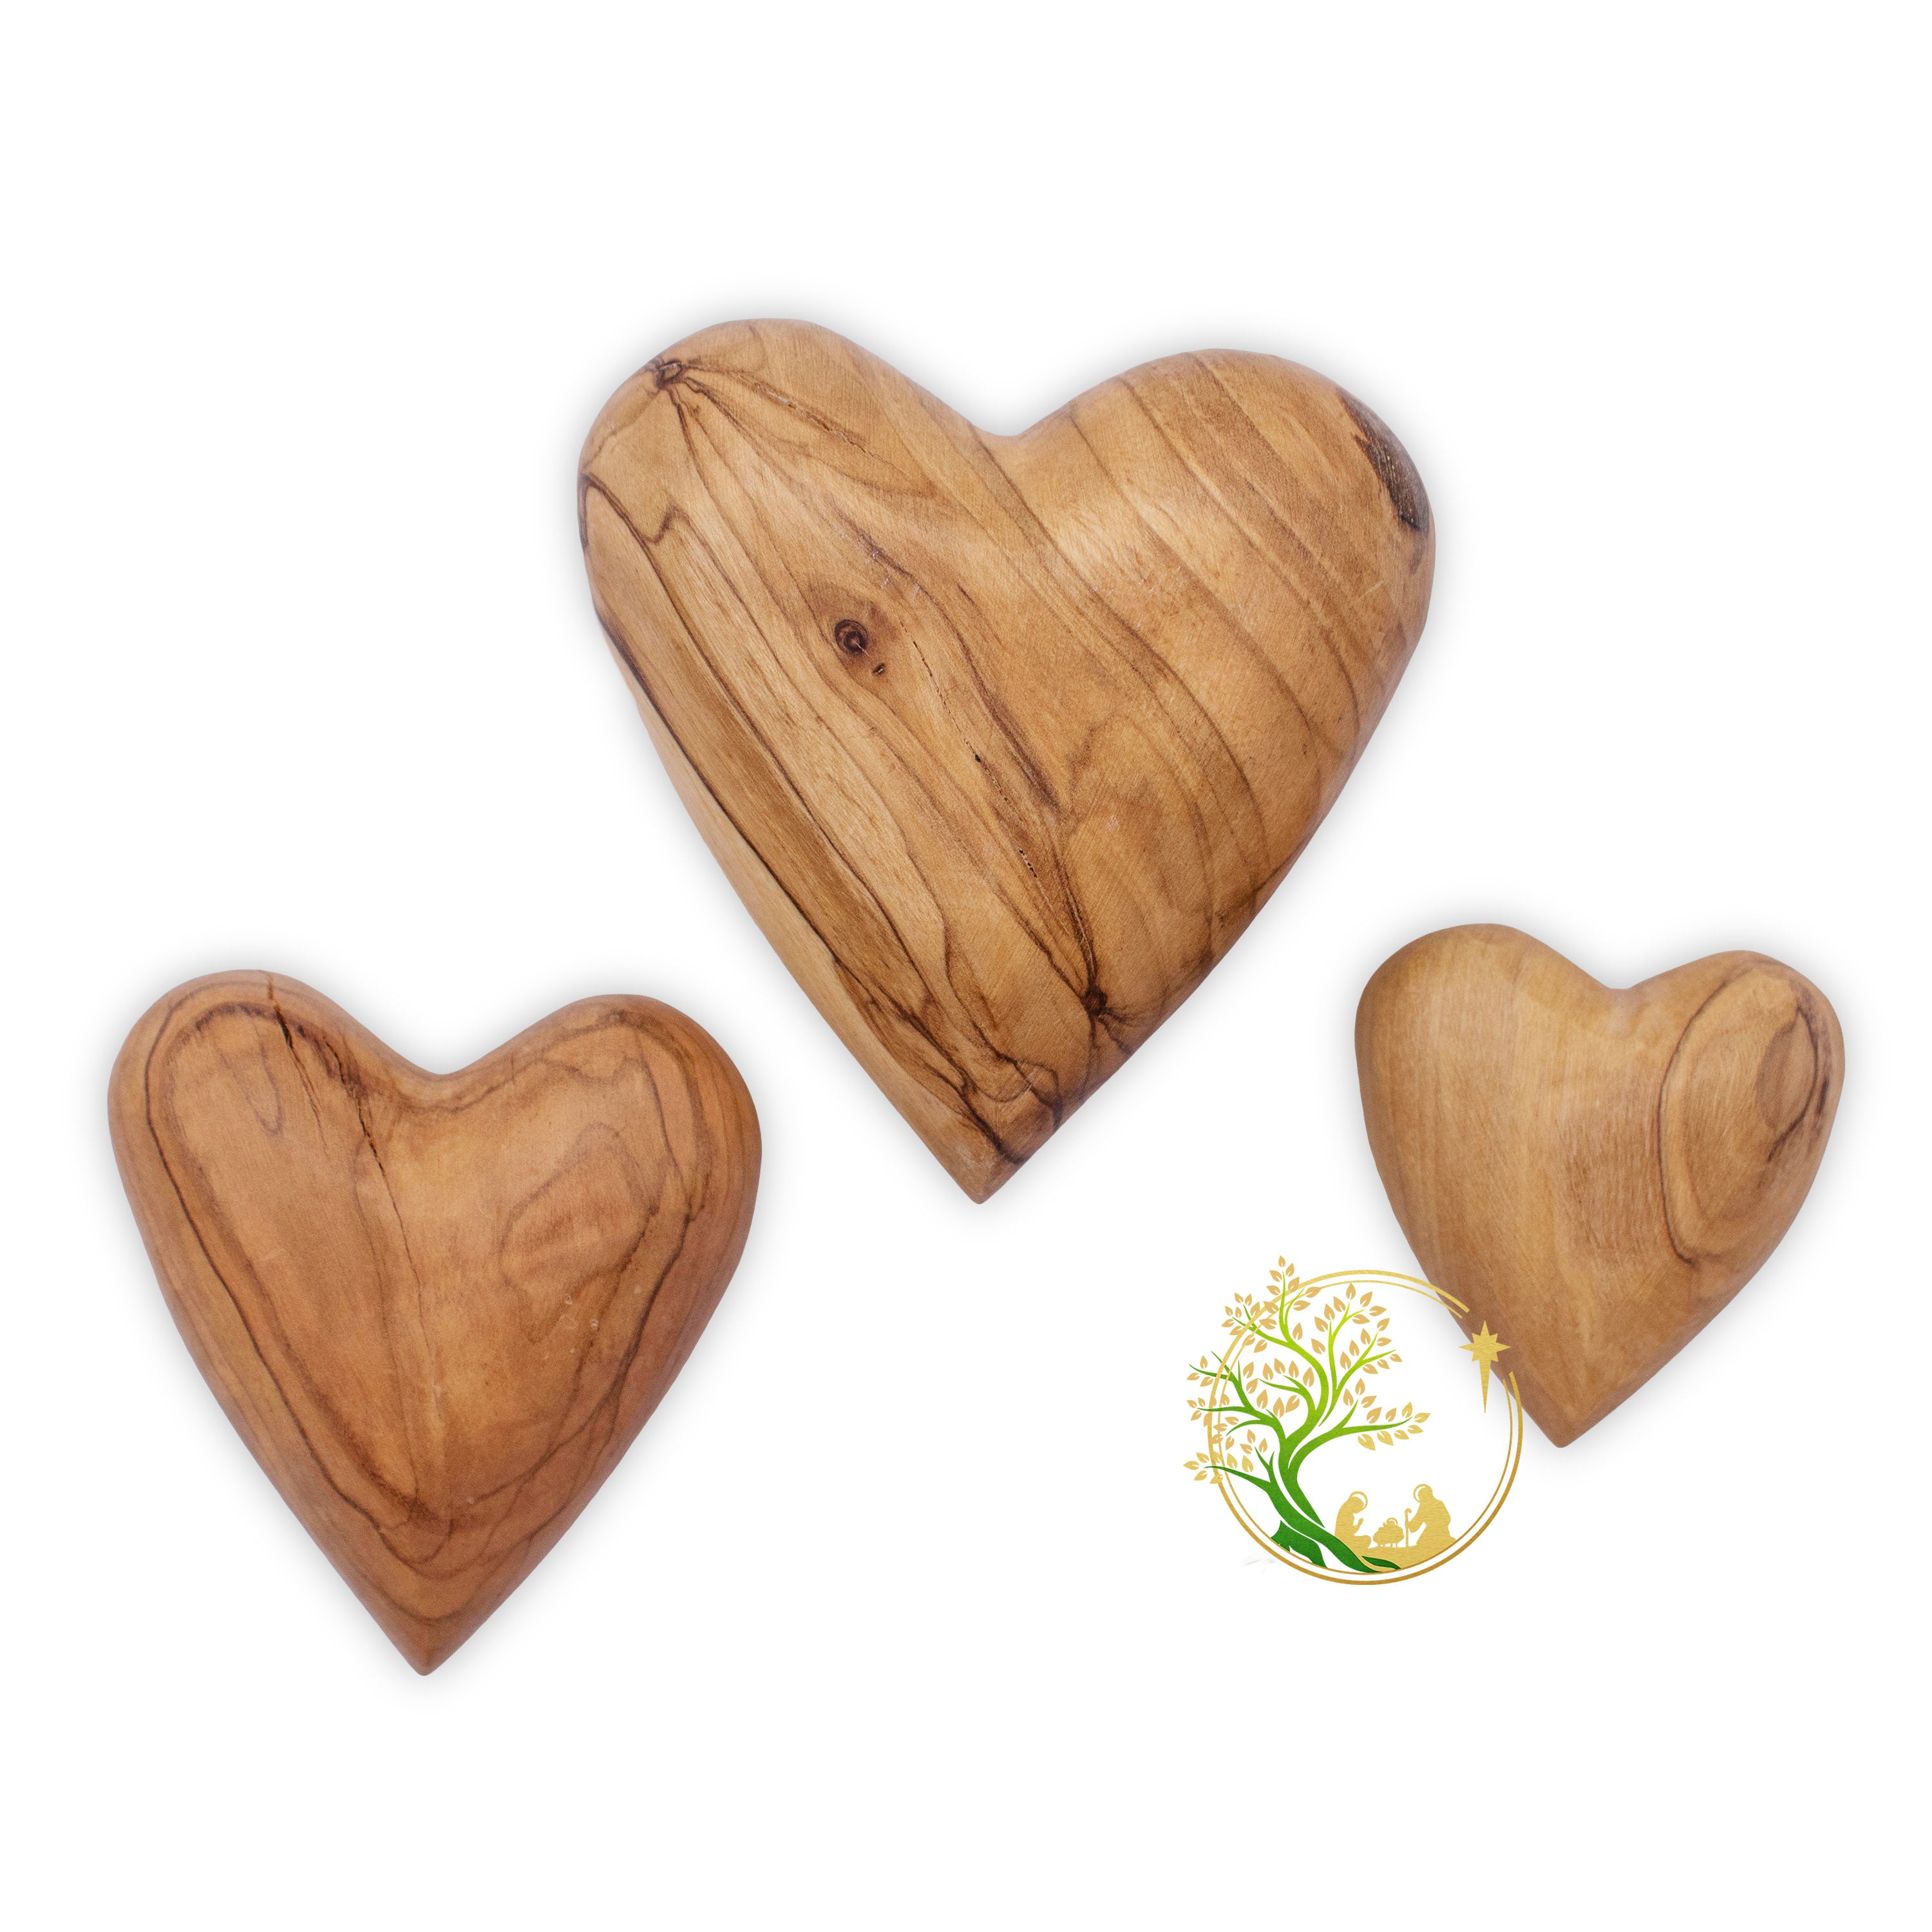 Hand-carved wooden Heart, Olive Wood Heart